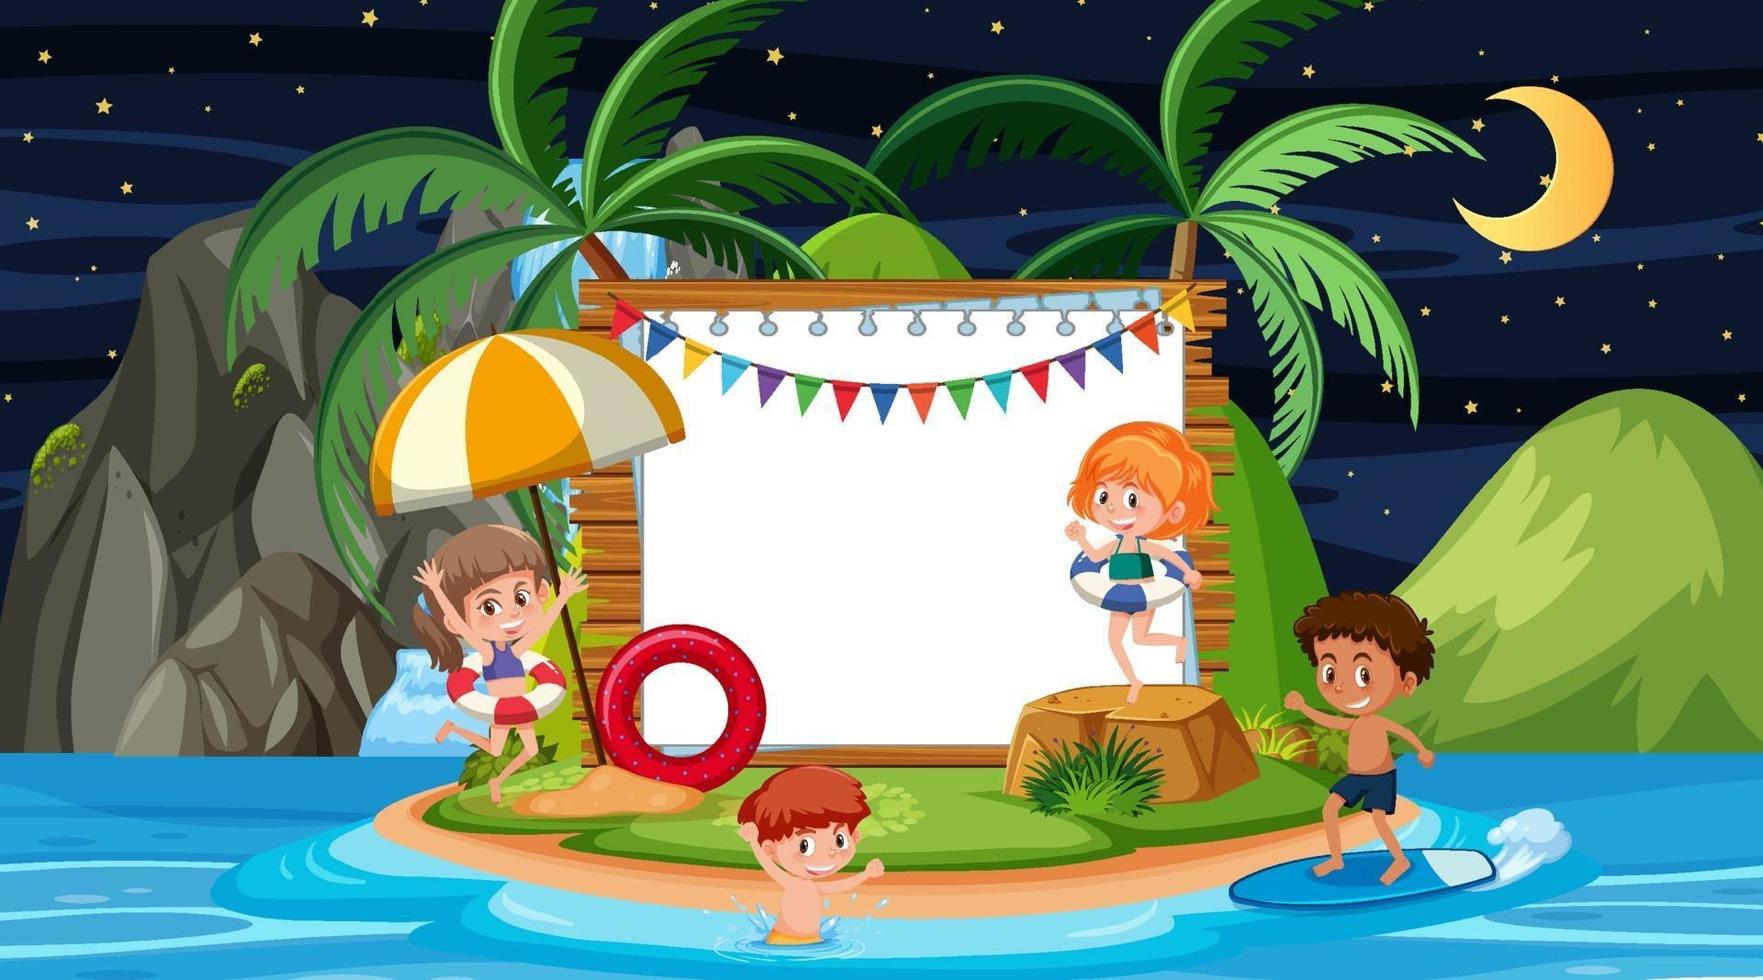 Kids on vacation at the beach night scene with an empty board template vector